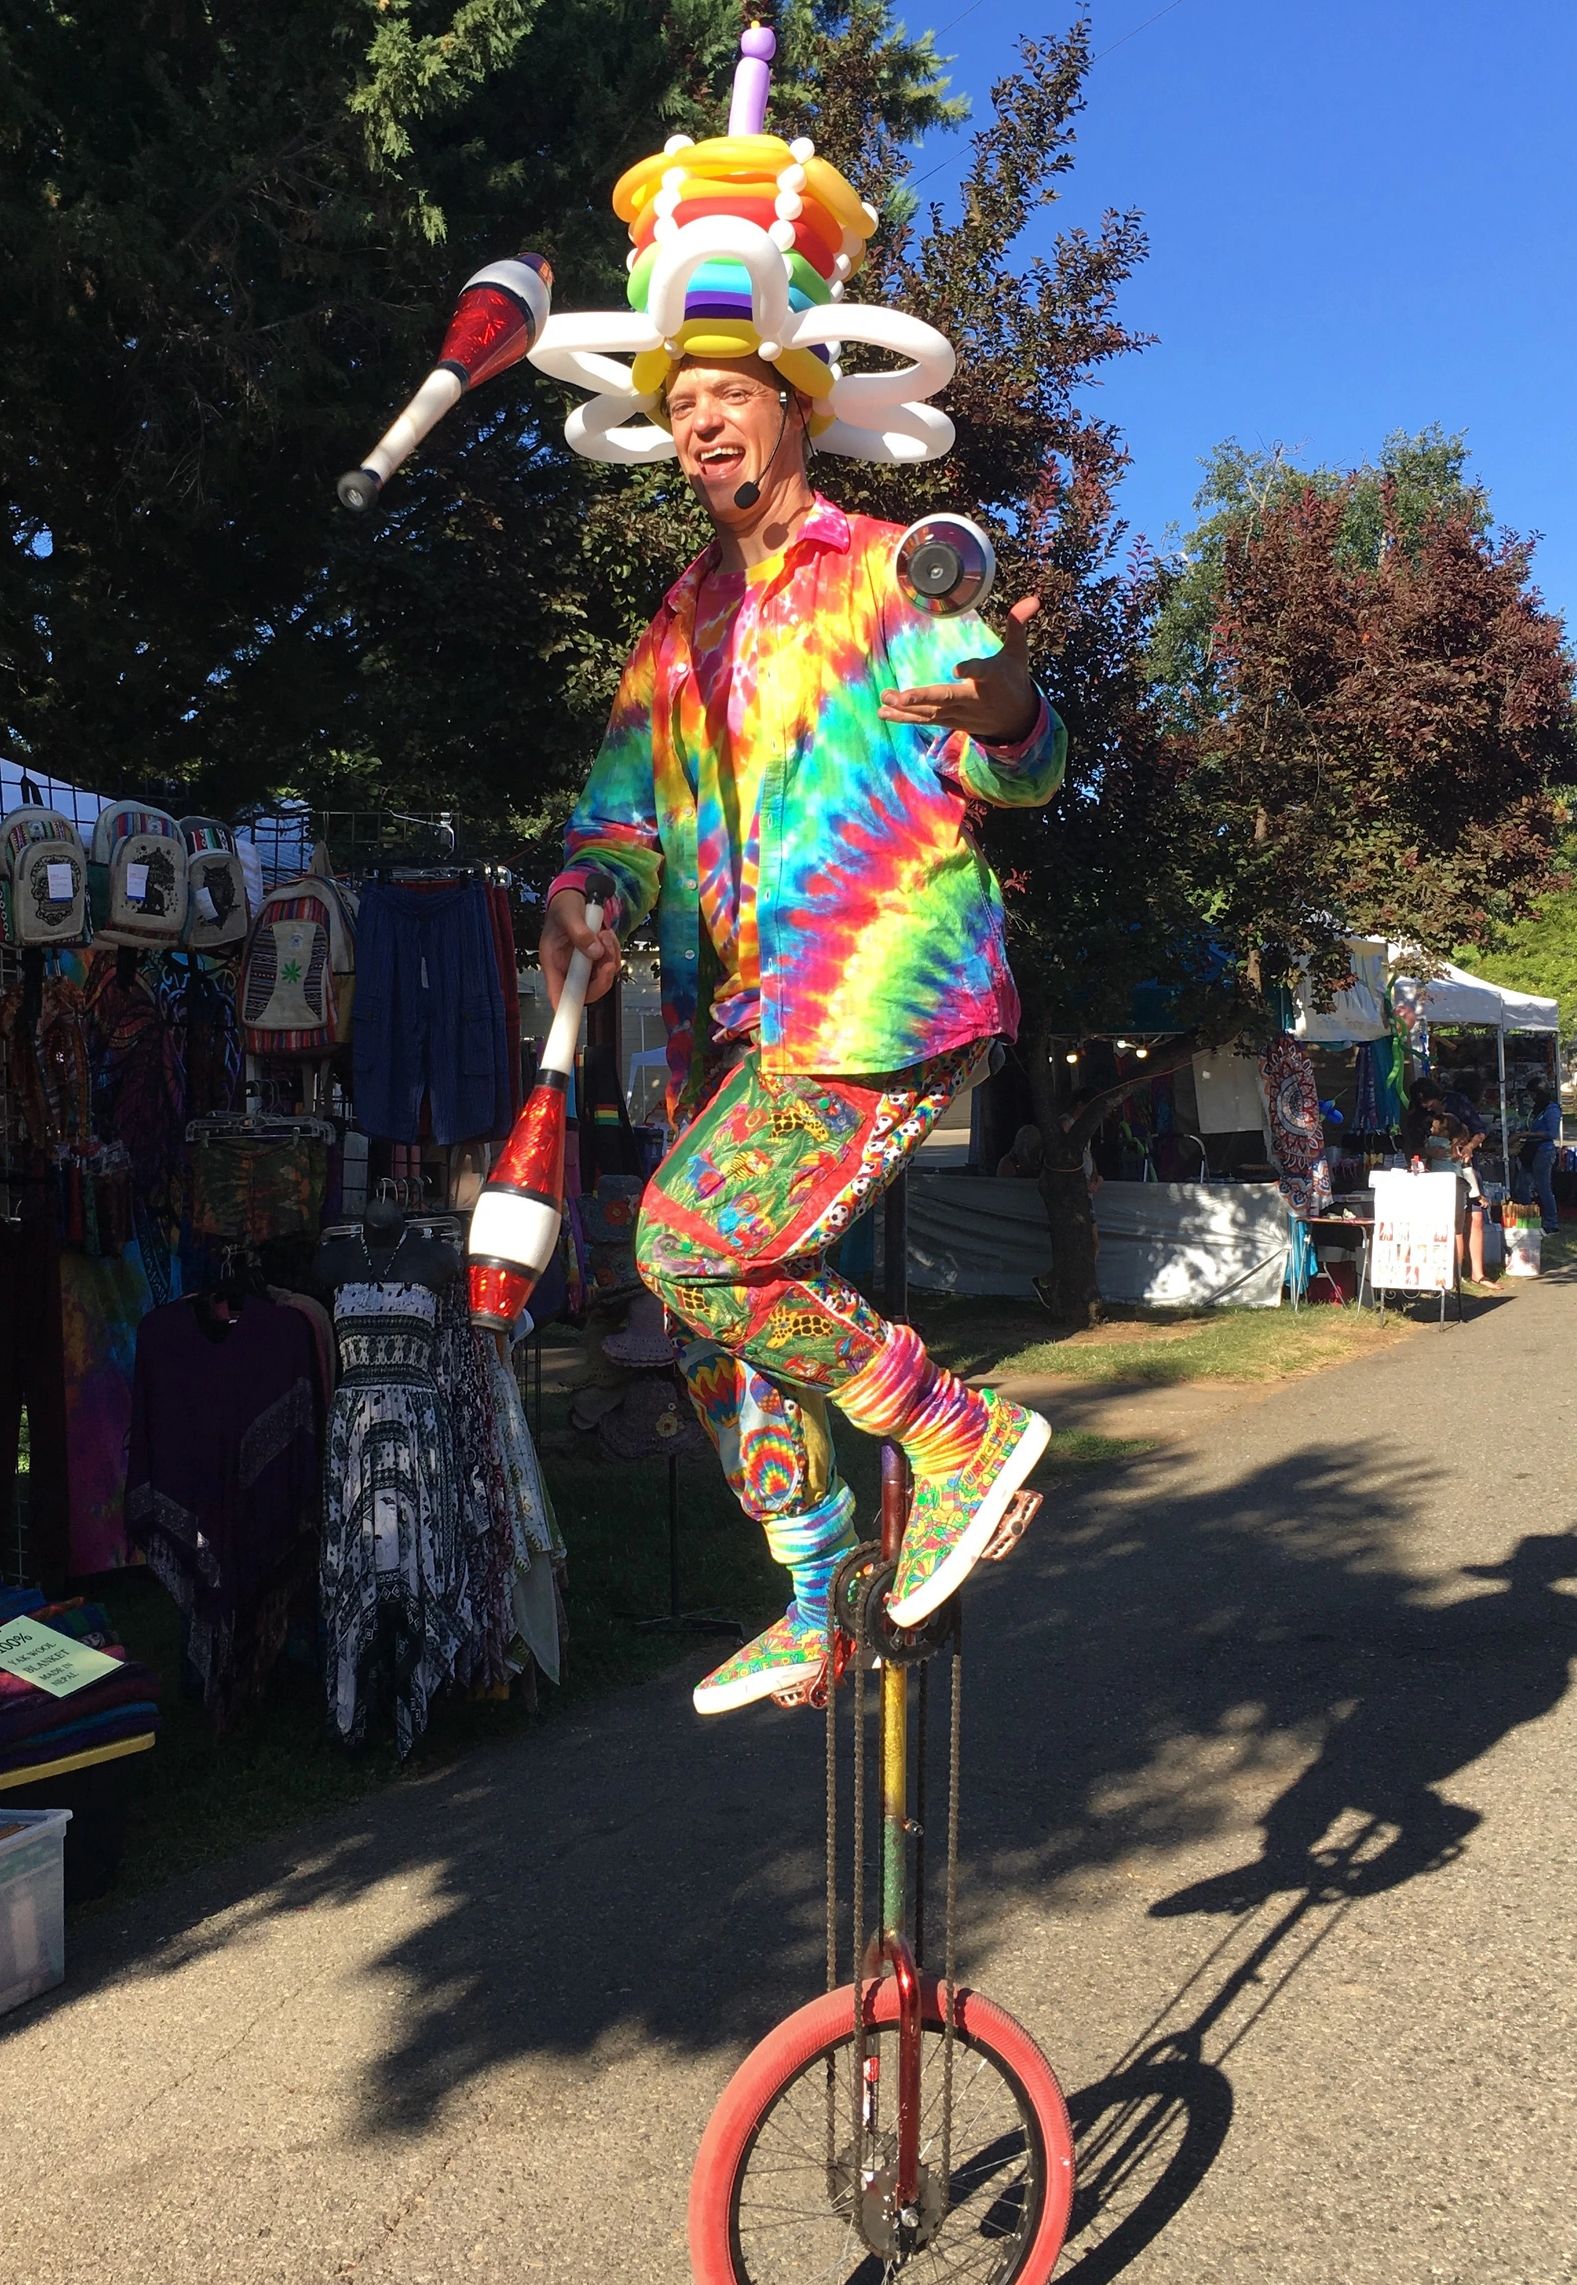 Jeremy the Juggler juggling clubs on giraffe unicycle at county fair.  Tie-dye outfit.